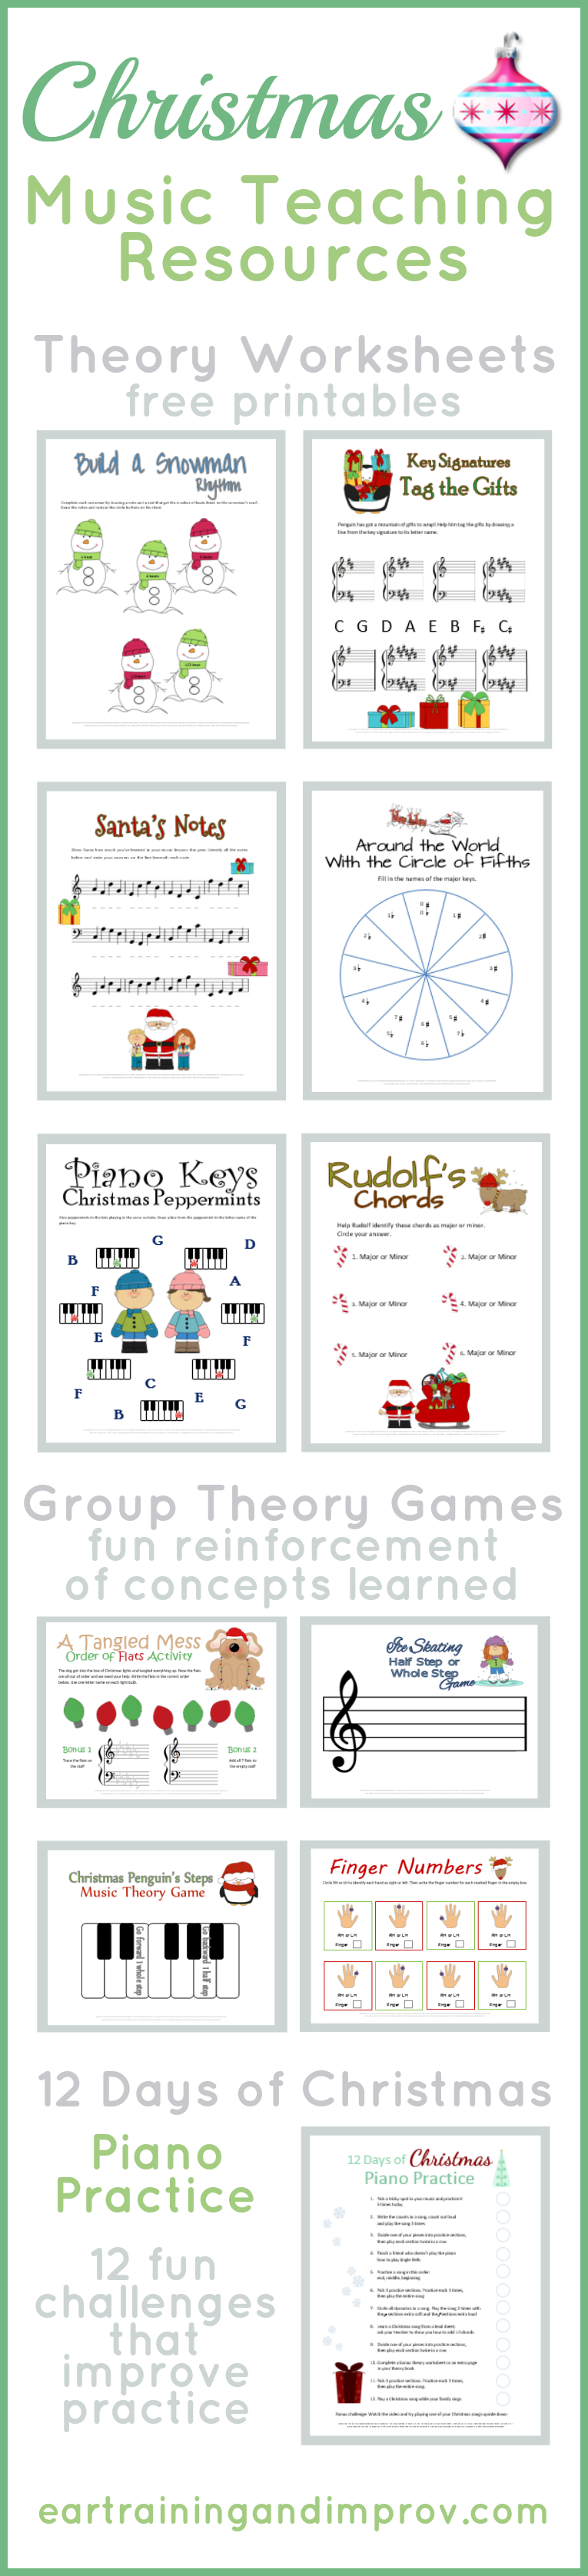 Christmas Music Theory Worksheets - 20+ Free Printables - Beginner Piano Worksheets Printable Free